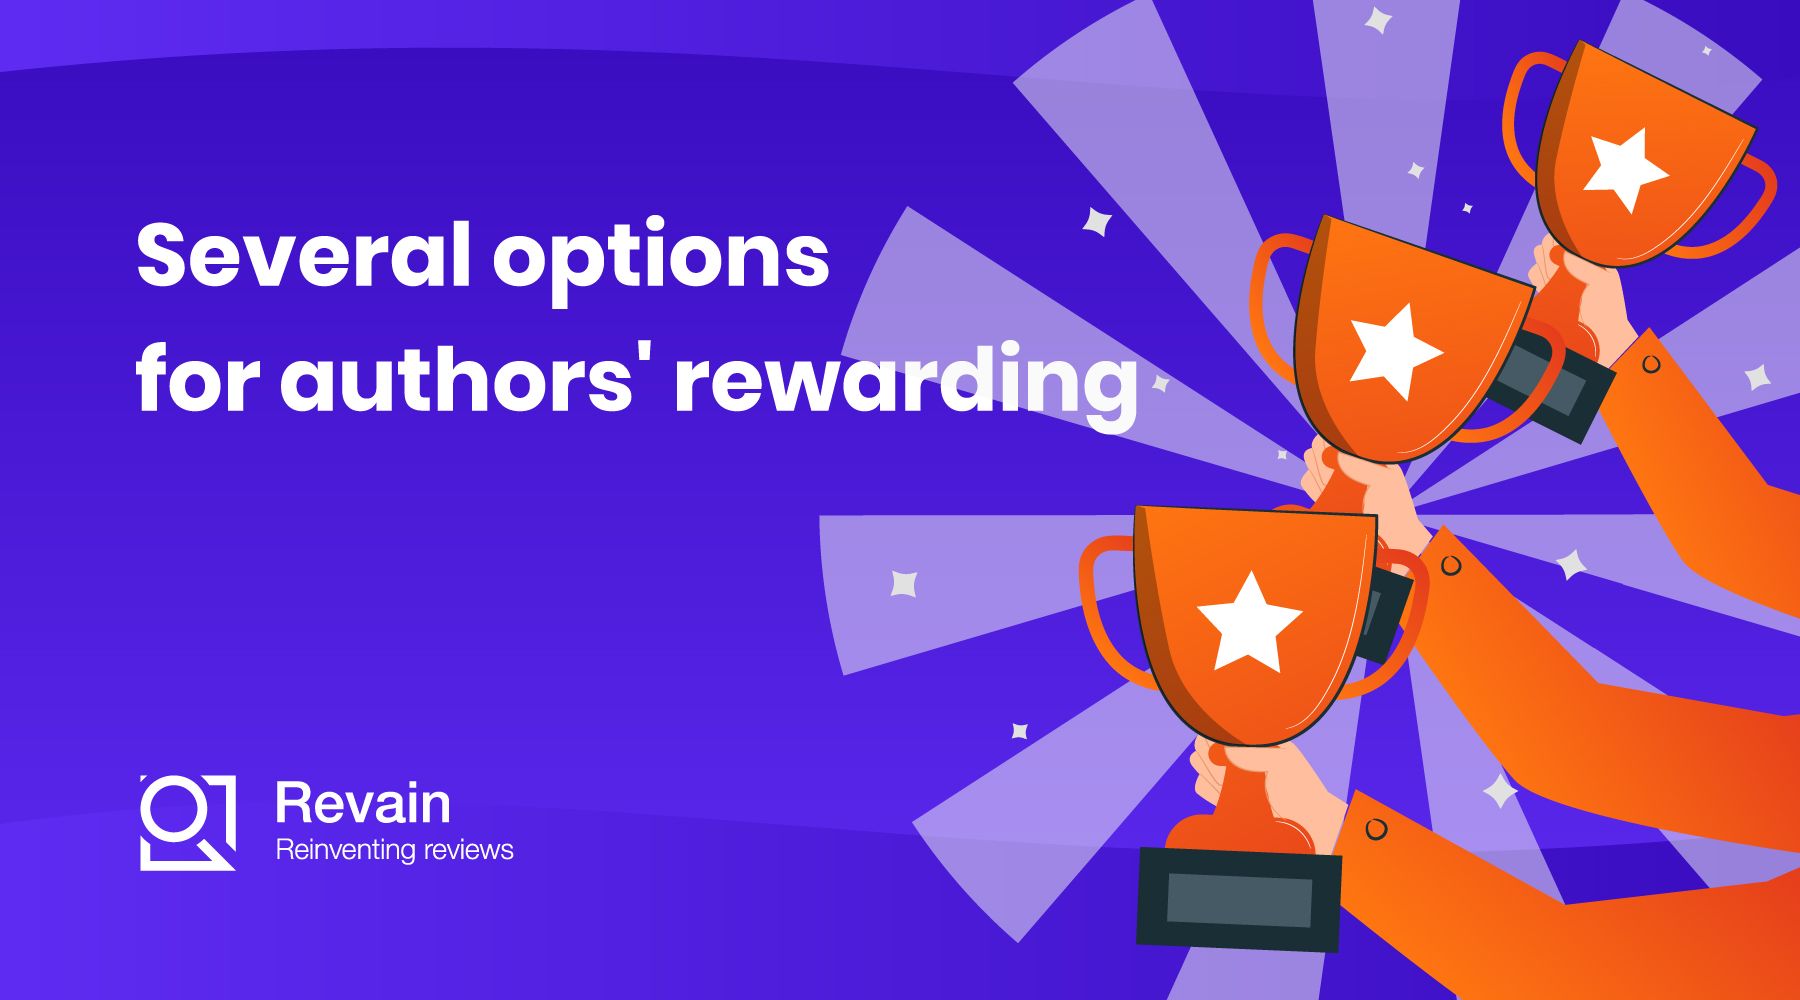 Several options for authors' rewarding